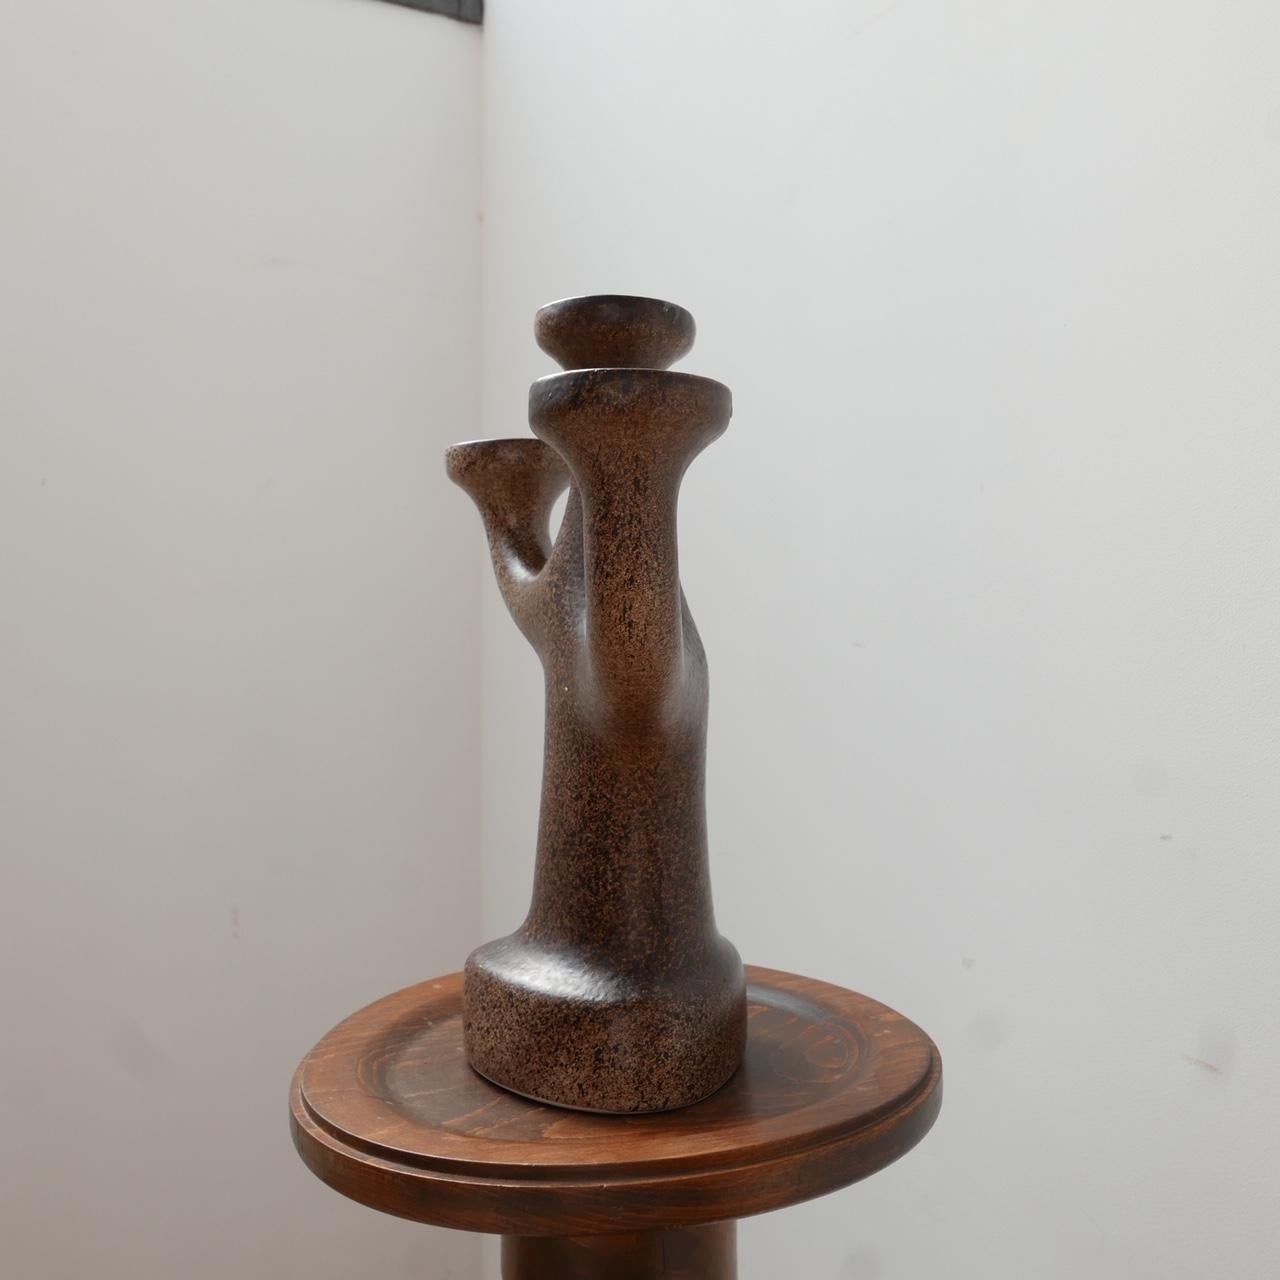 A stylish three arm sculptural candlestick holder. 

Signed Bastian Kemper

Sourced in Holland, likely mid to late 20th, c1970s. 

Very good condition. 

Dimensions: 29 W x 13 D x 34 H in cm.

Delivery: POA.

 